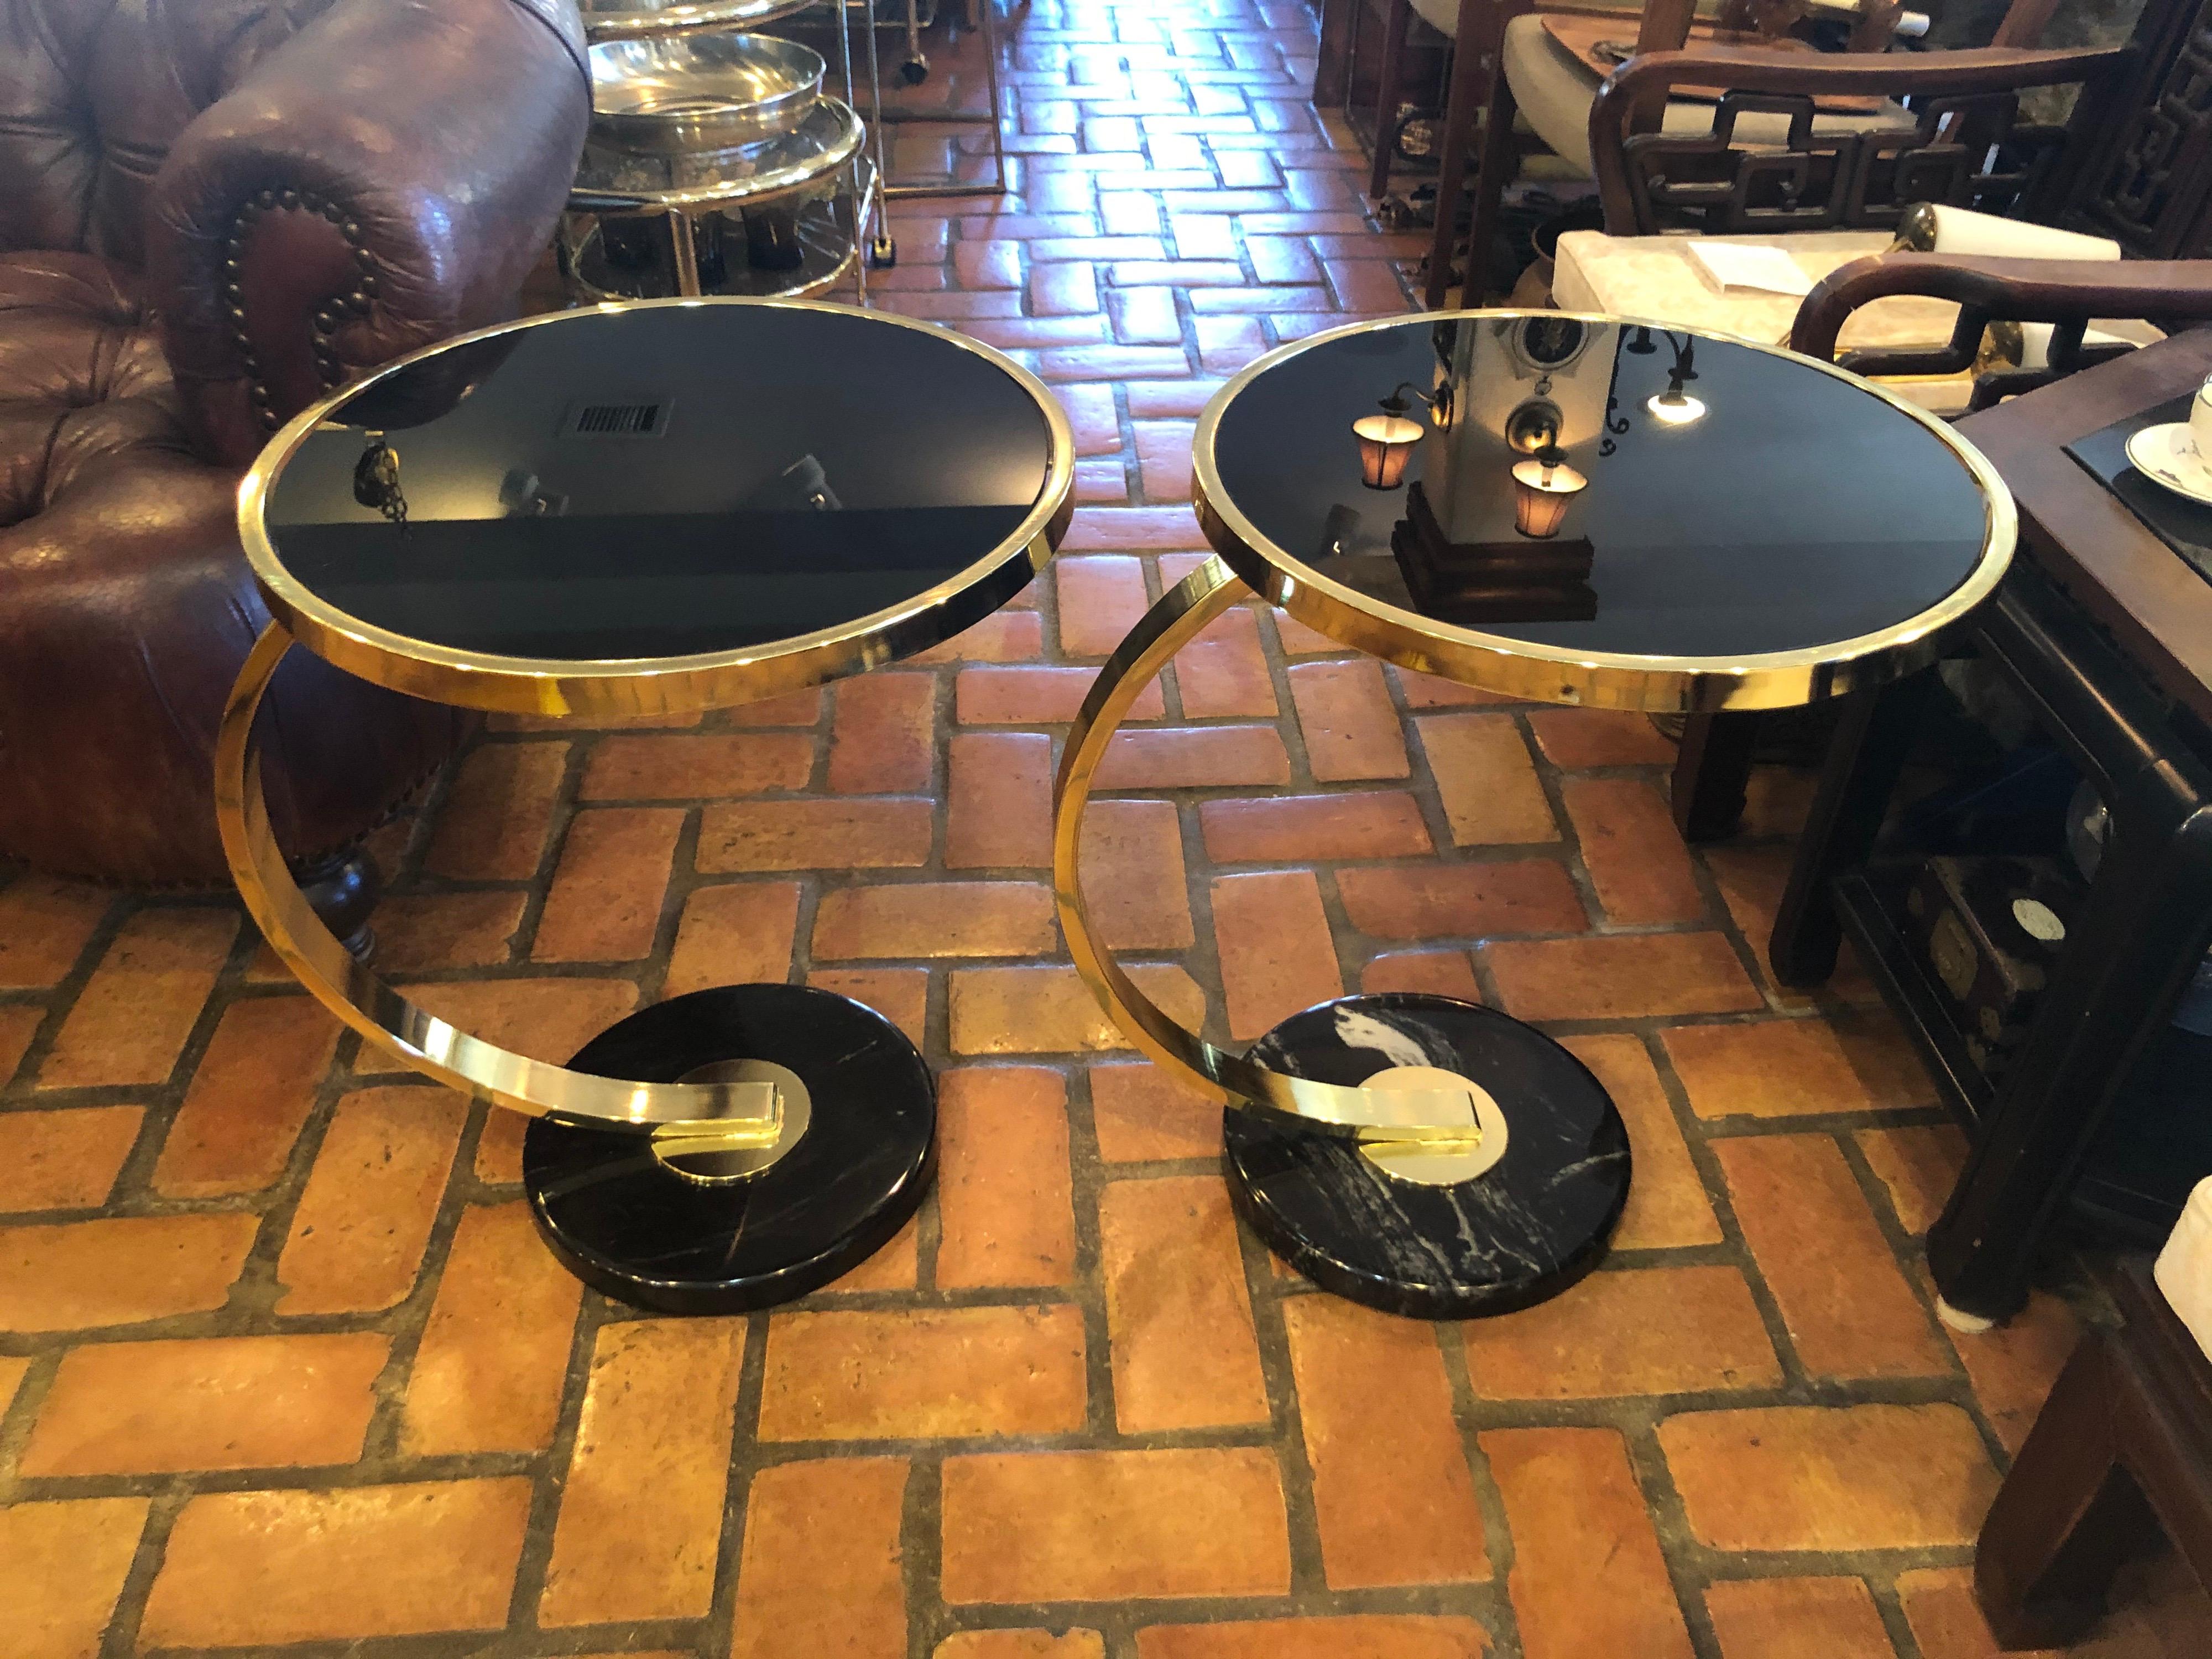 Pair of Art Deco style brass and black glass end tables. Round black marble bases with polished brass stems and black glass table tops. Sheer sophistication. Timeless design. Table top diameter is 18